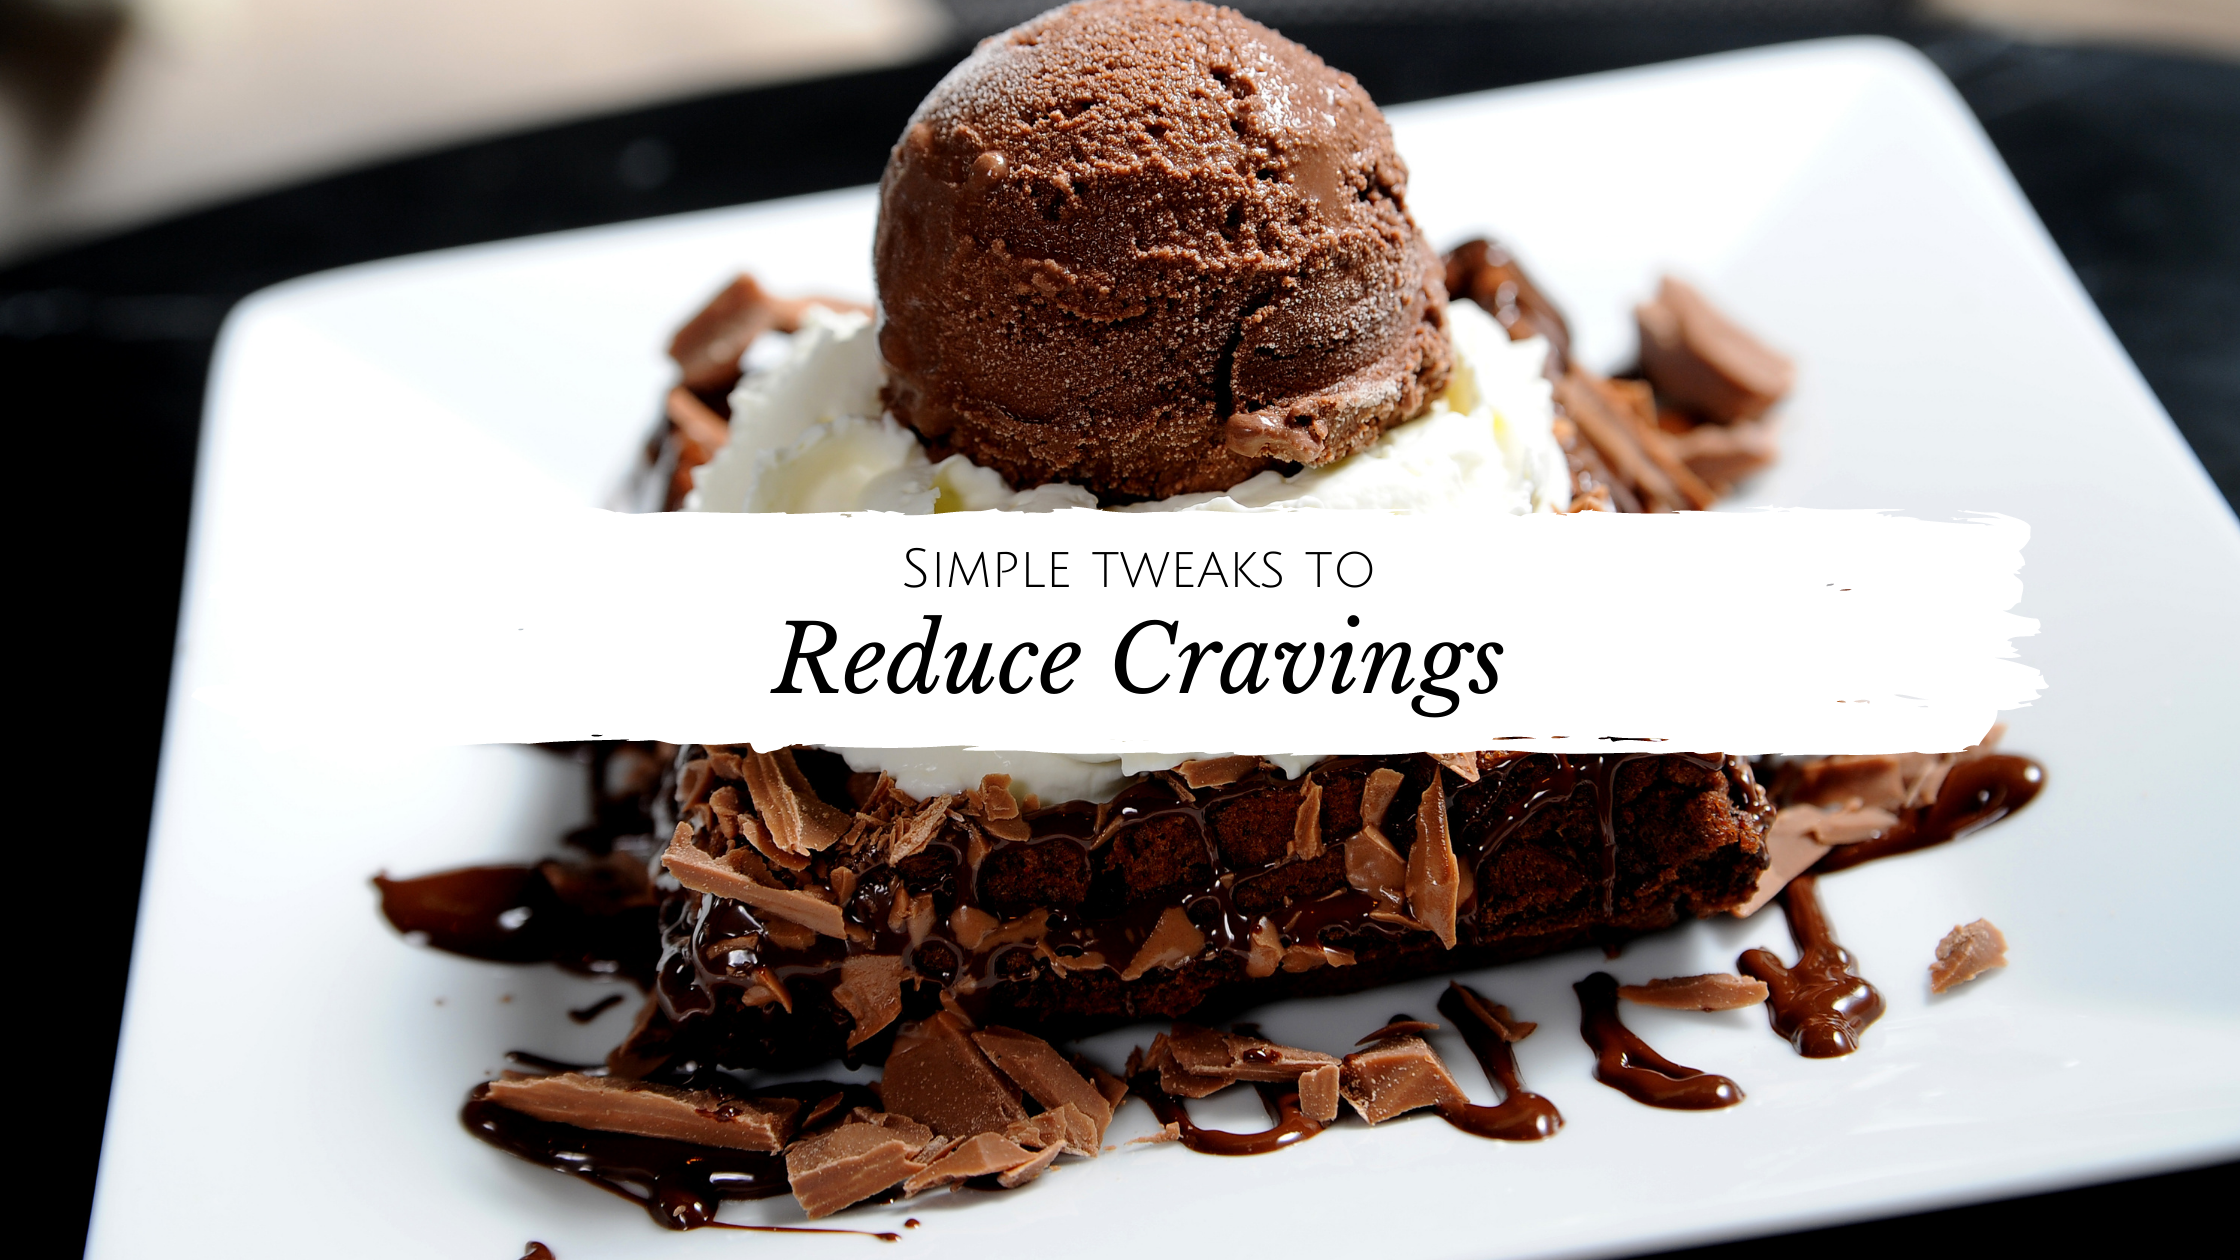 picture of brownie with chocolate ice cream on top with text "simple tweaks to reduce cravings" overlaid on top